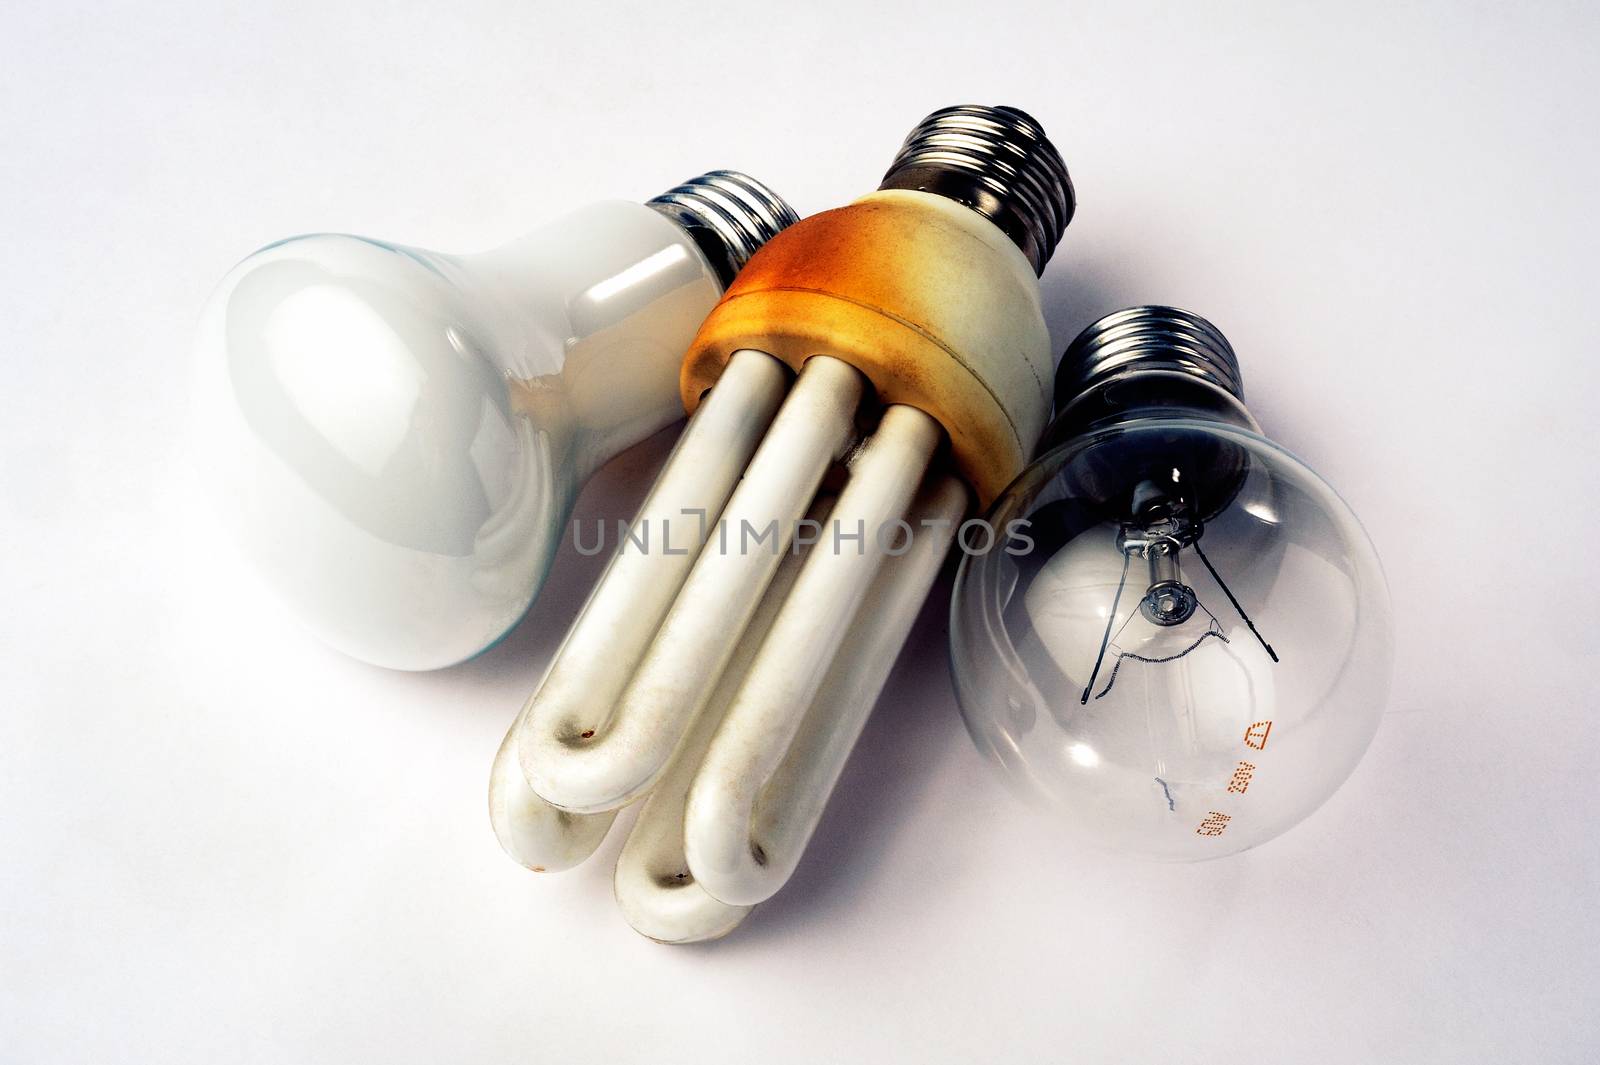 Recycling of used light bulb and economic legacy on white background